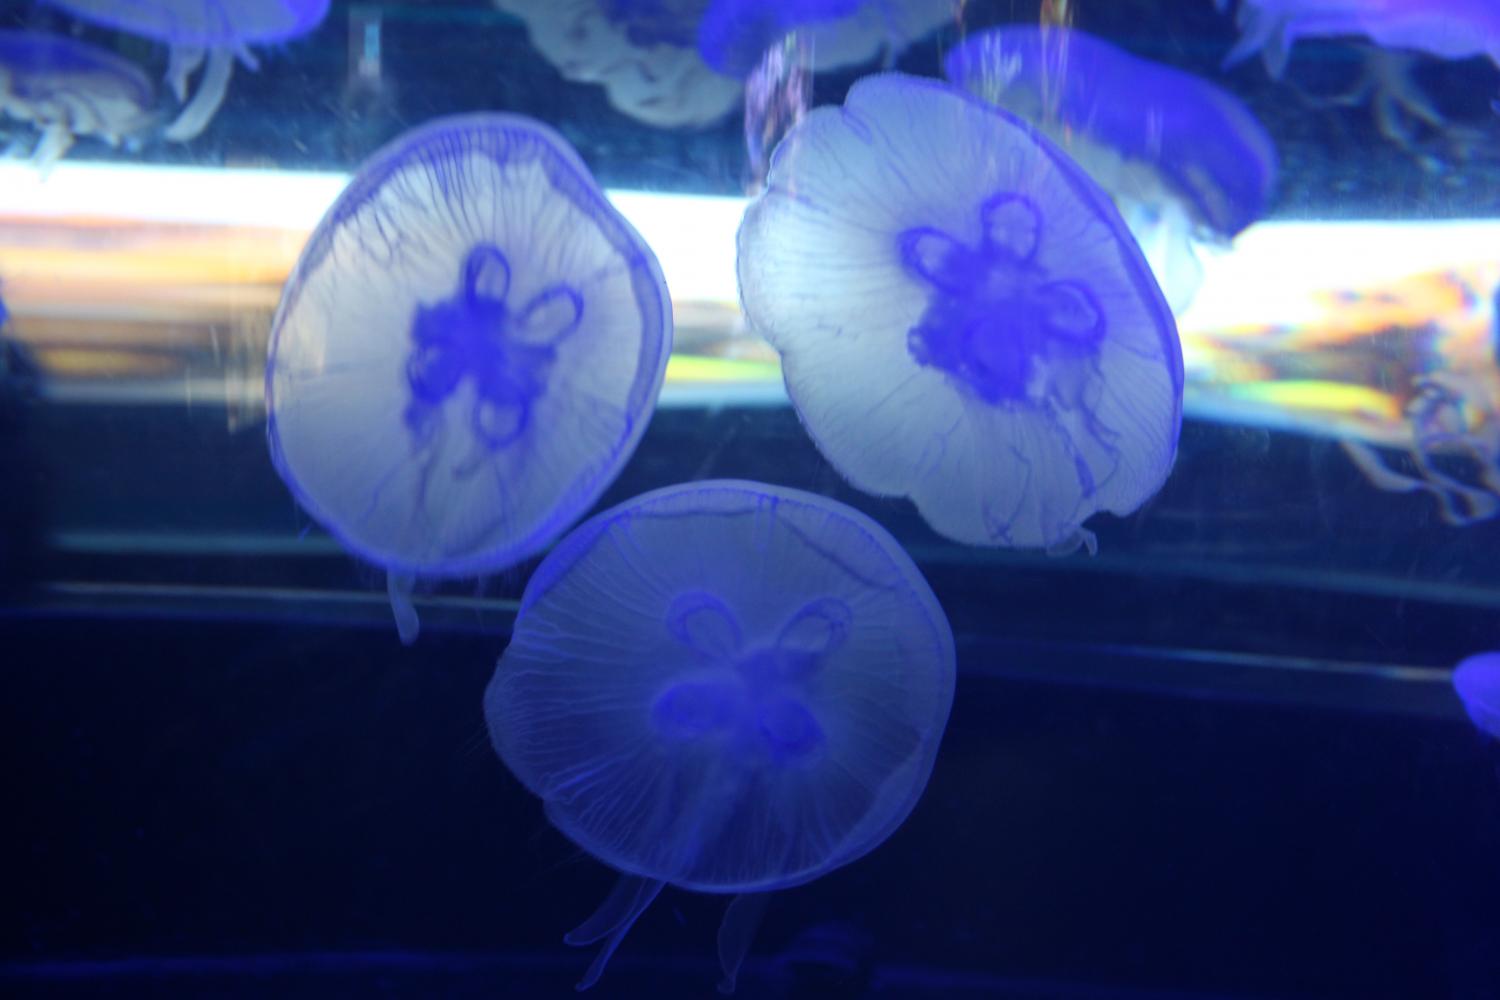 Entering the Aquarium is the jellyfish, illuminating the color of the a multi-colored light from above the tank.